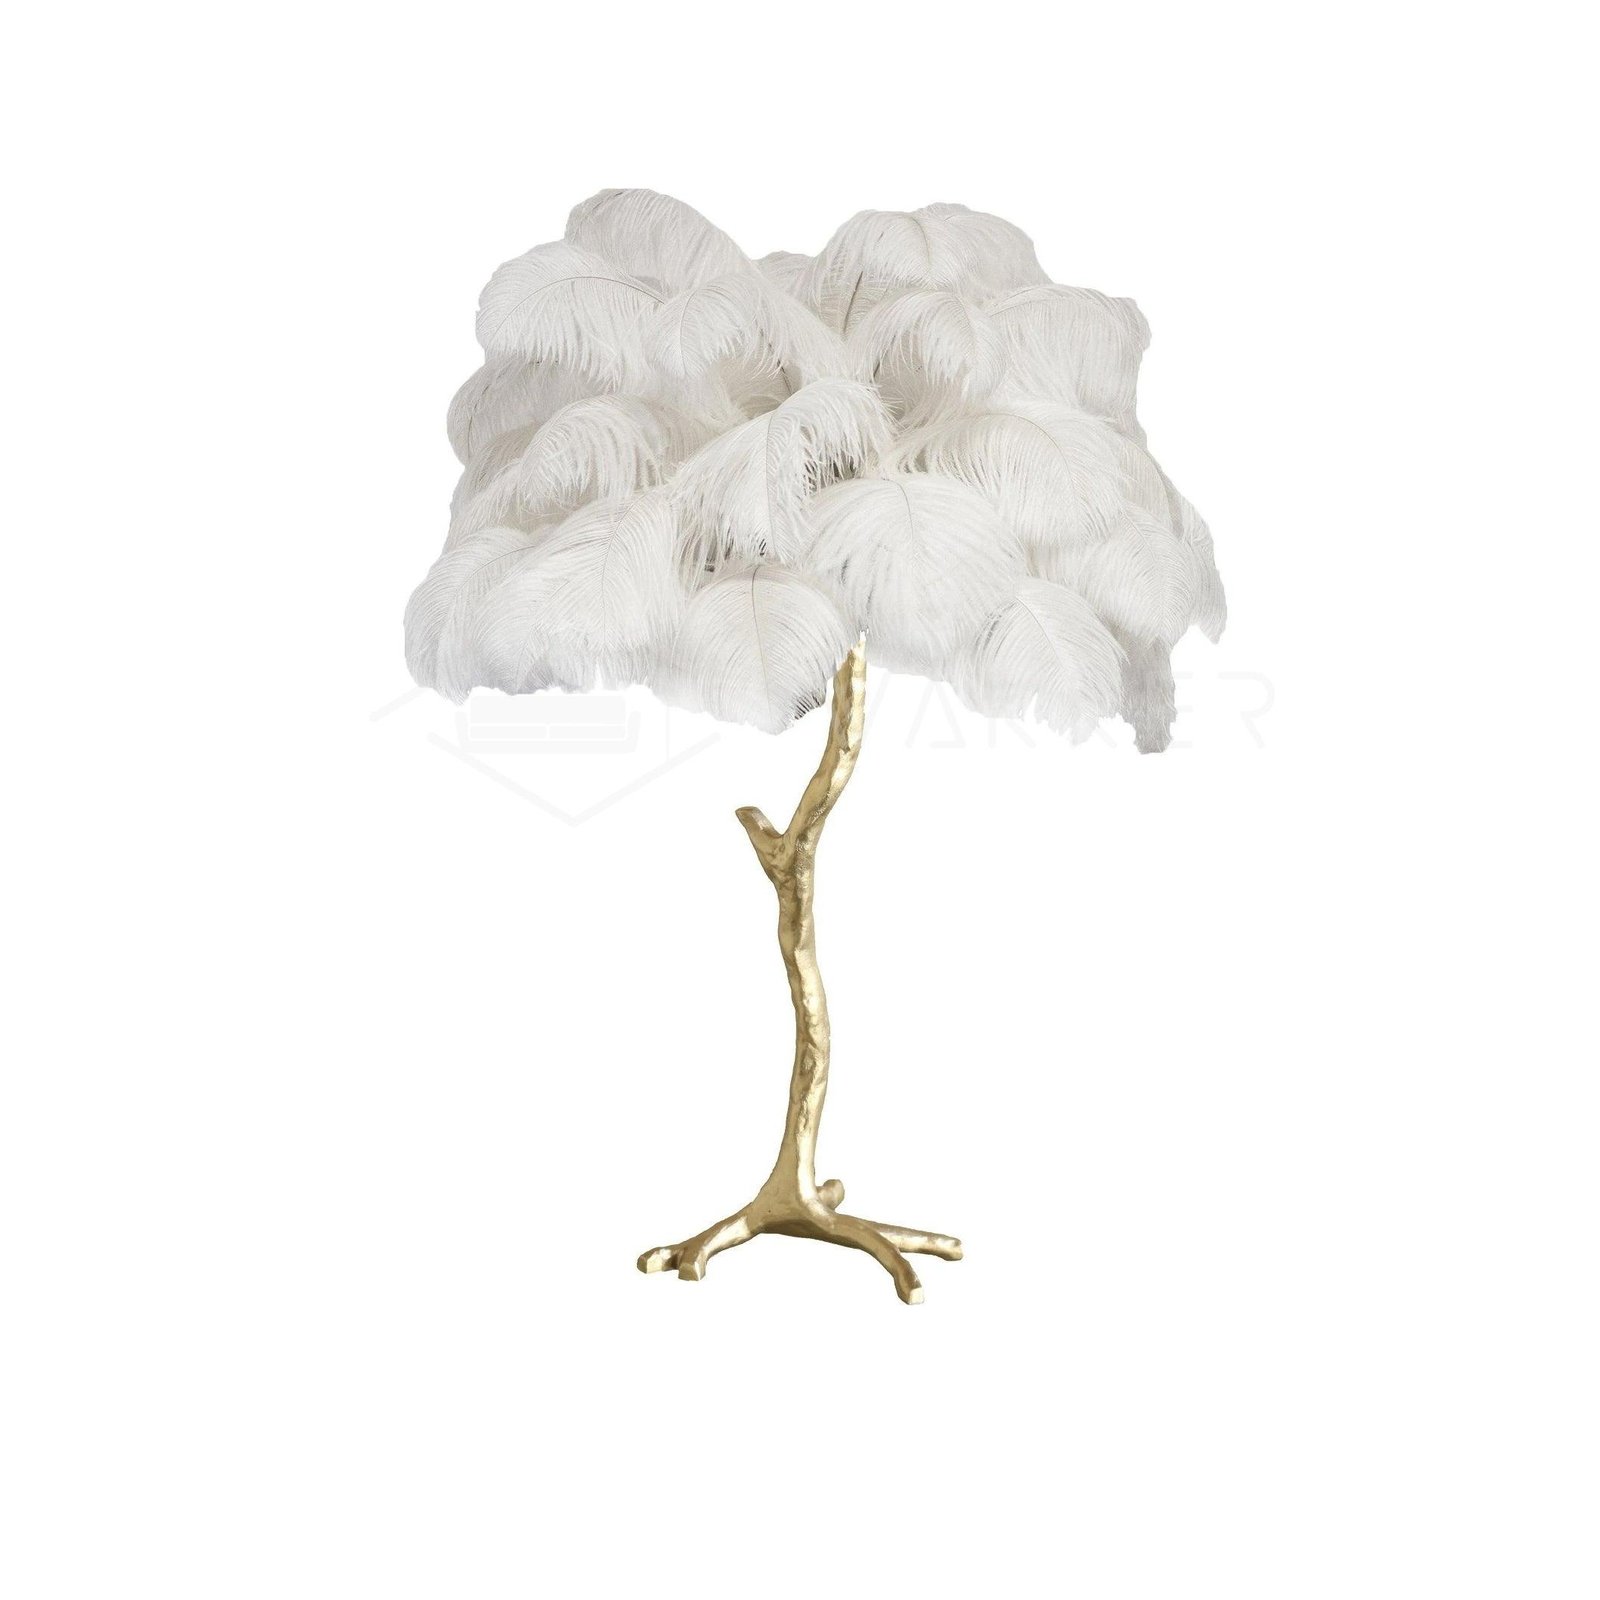 Polished Brass Table Lamp with White Ostrich Feather Shade, 29.5" Diameter x 29.5" Height (75cm x 75cm)